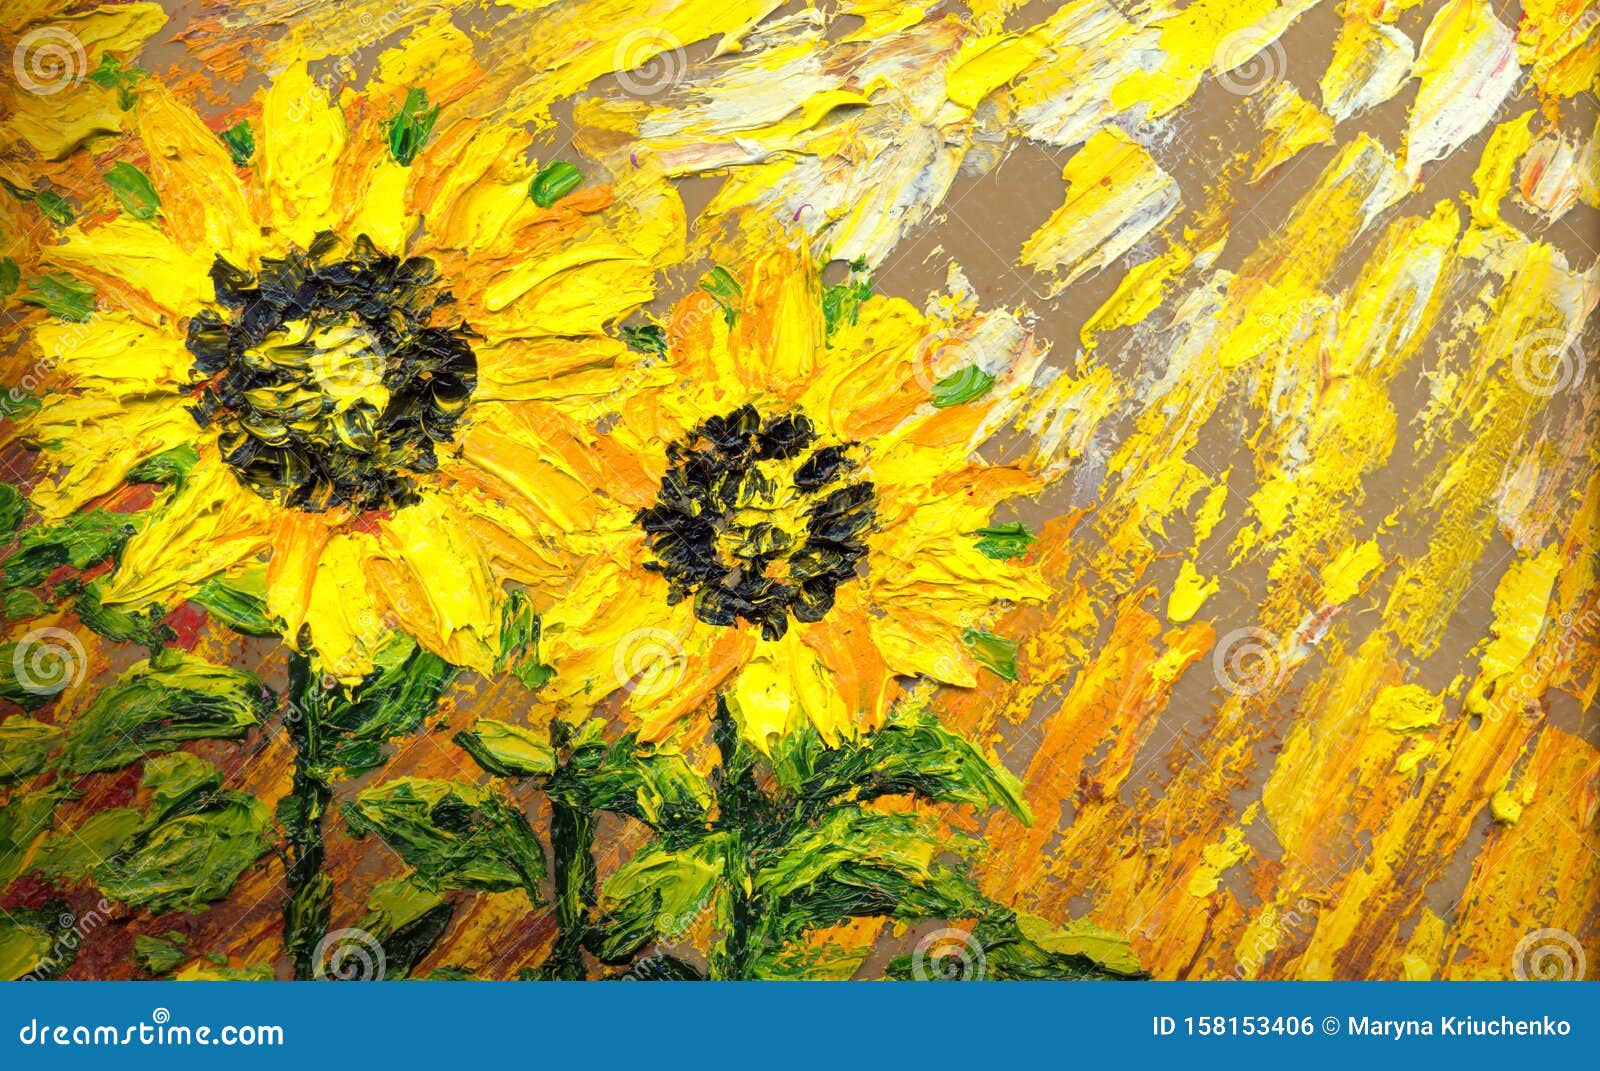 Abstract Painting Bright Sunflowers On The Field Stock